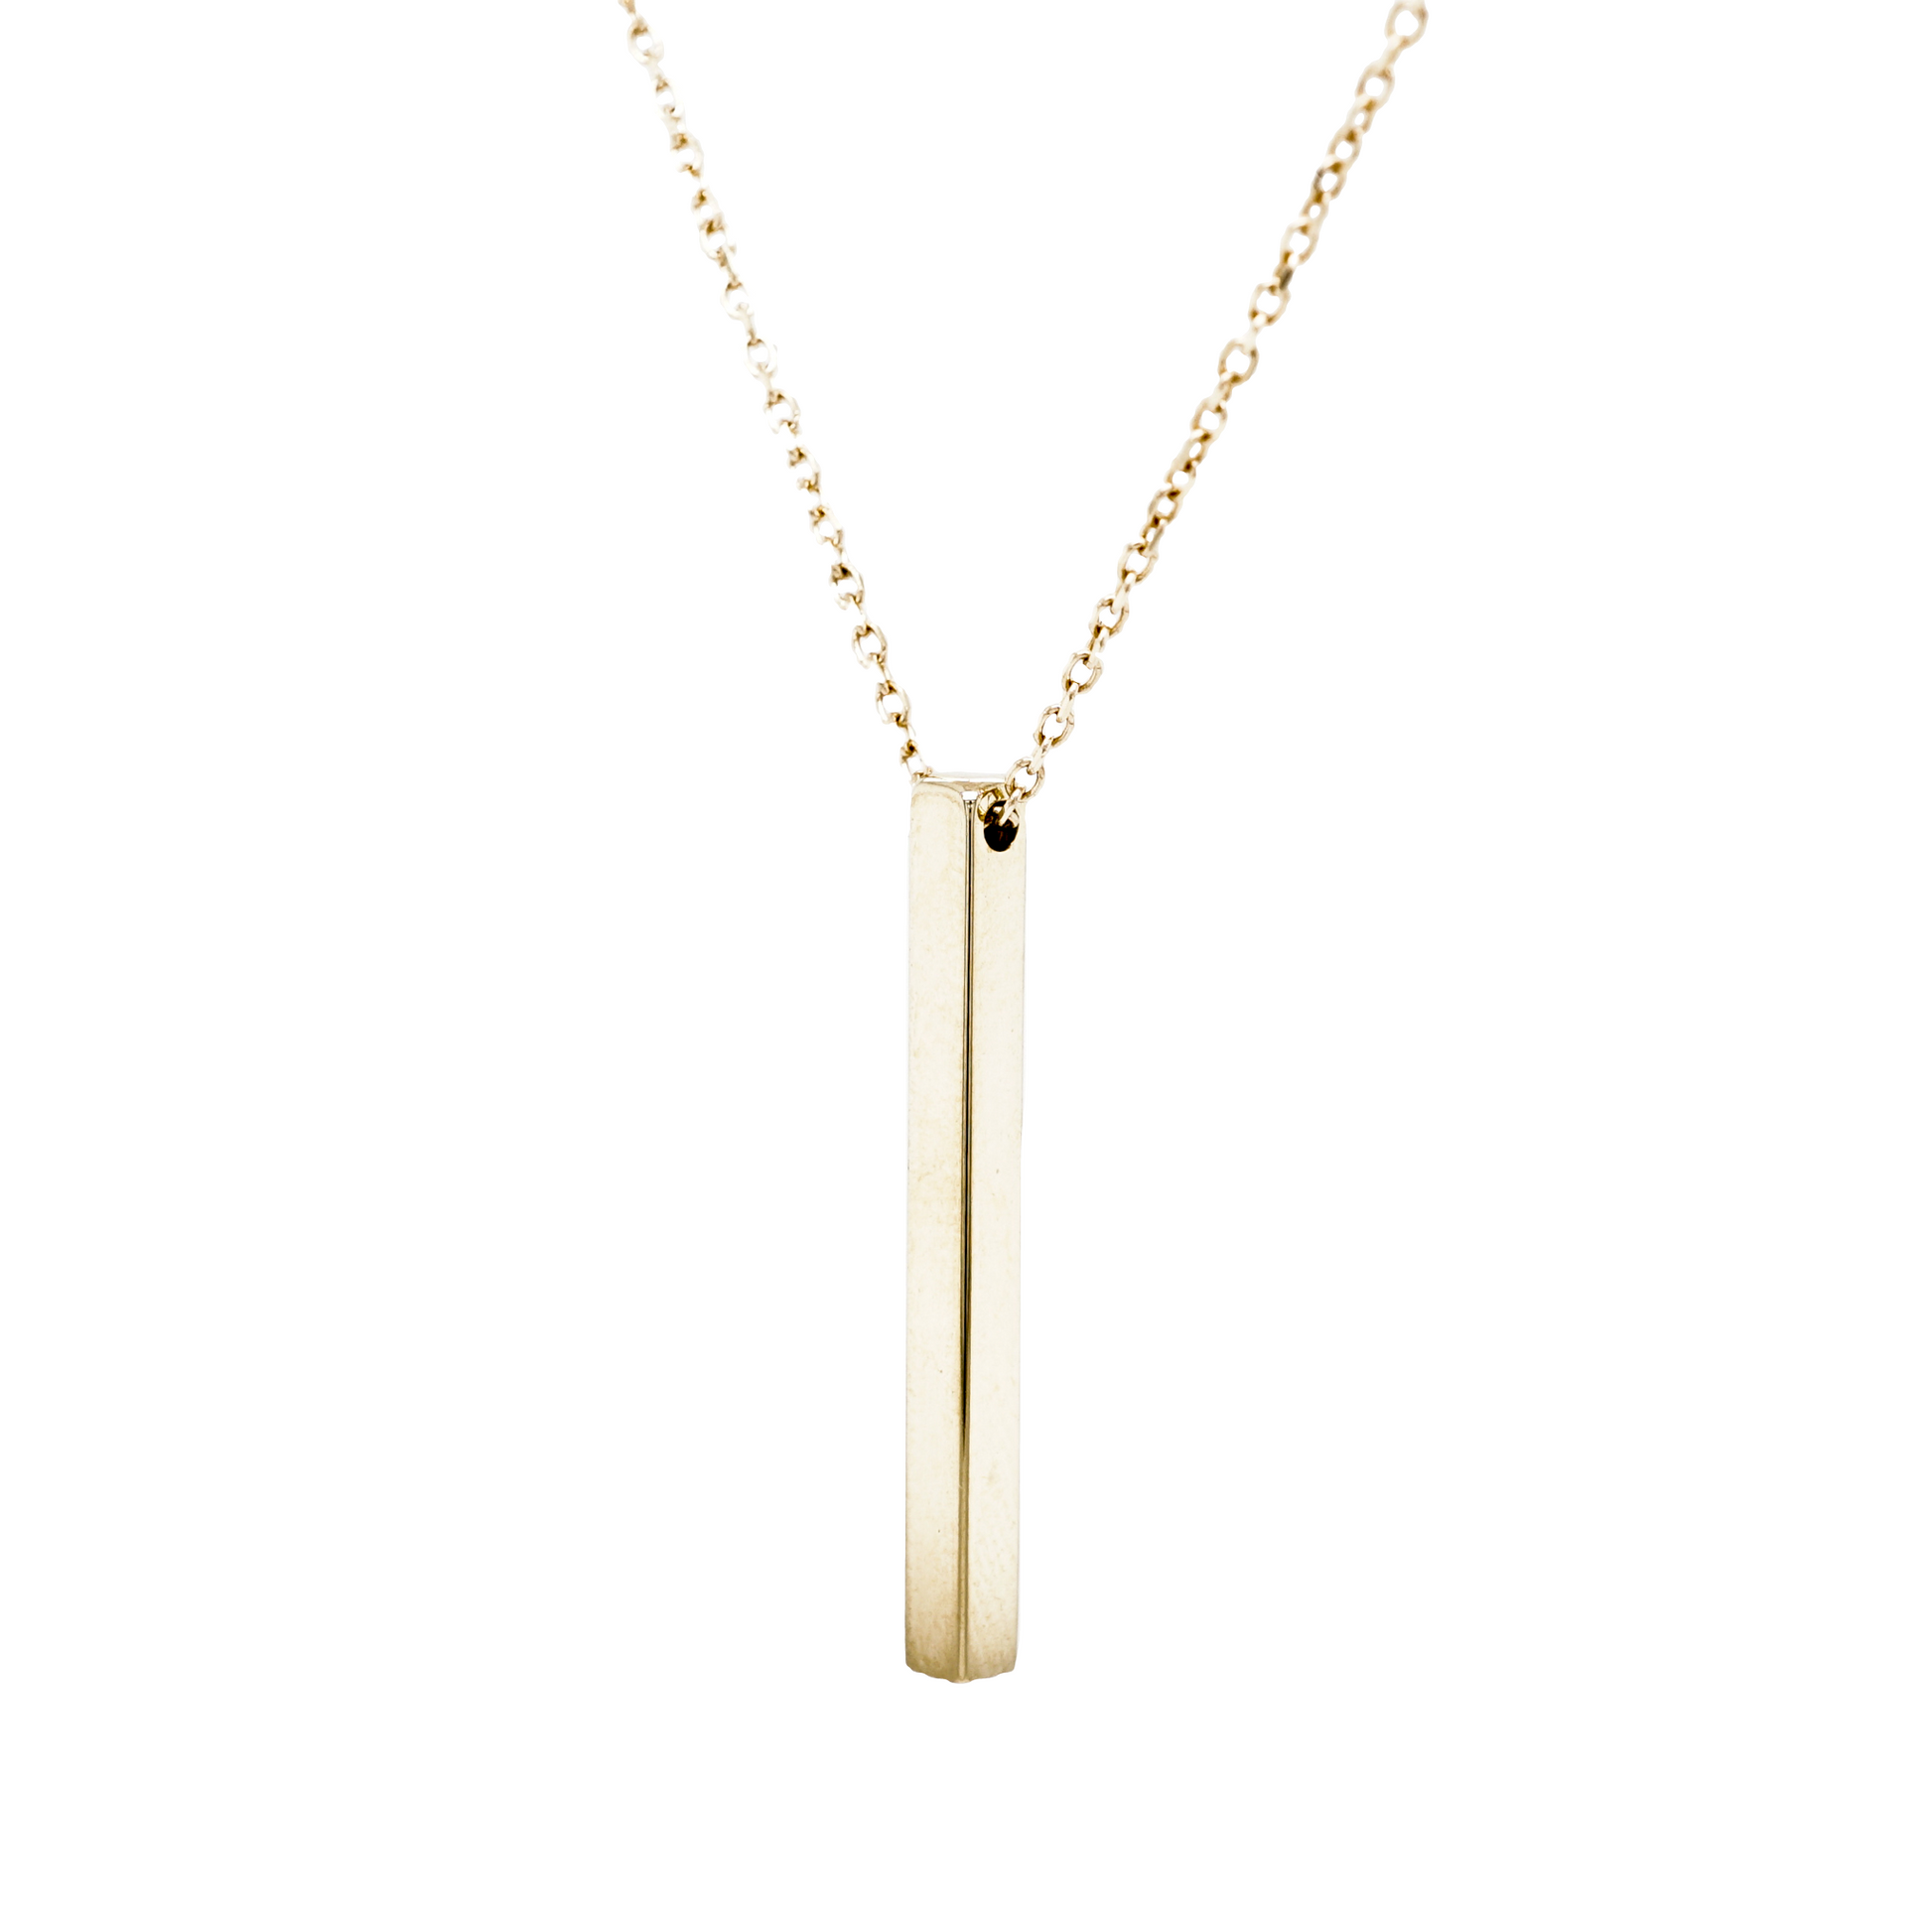 Vertical Bar Pendant Necklace in 14k Yellow GoldComposition: PlatinumTotal Gram Weight: 3.1 gInscription: MS CO 14k 